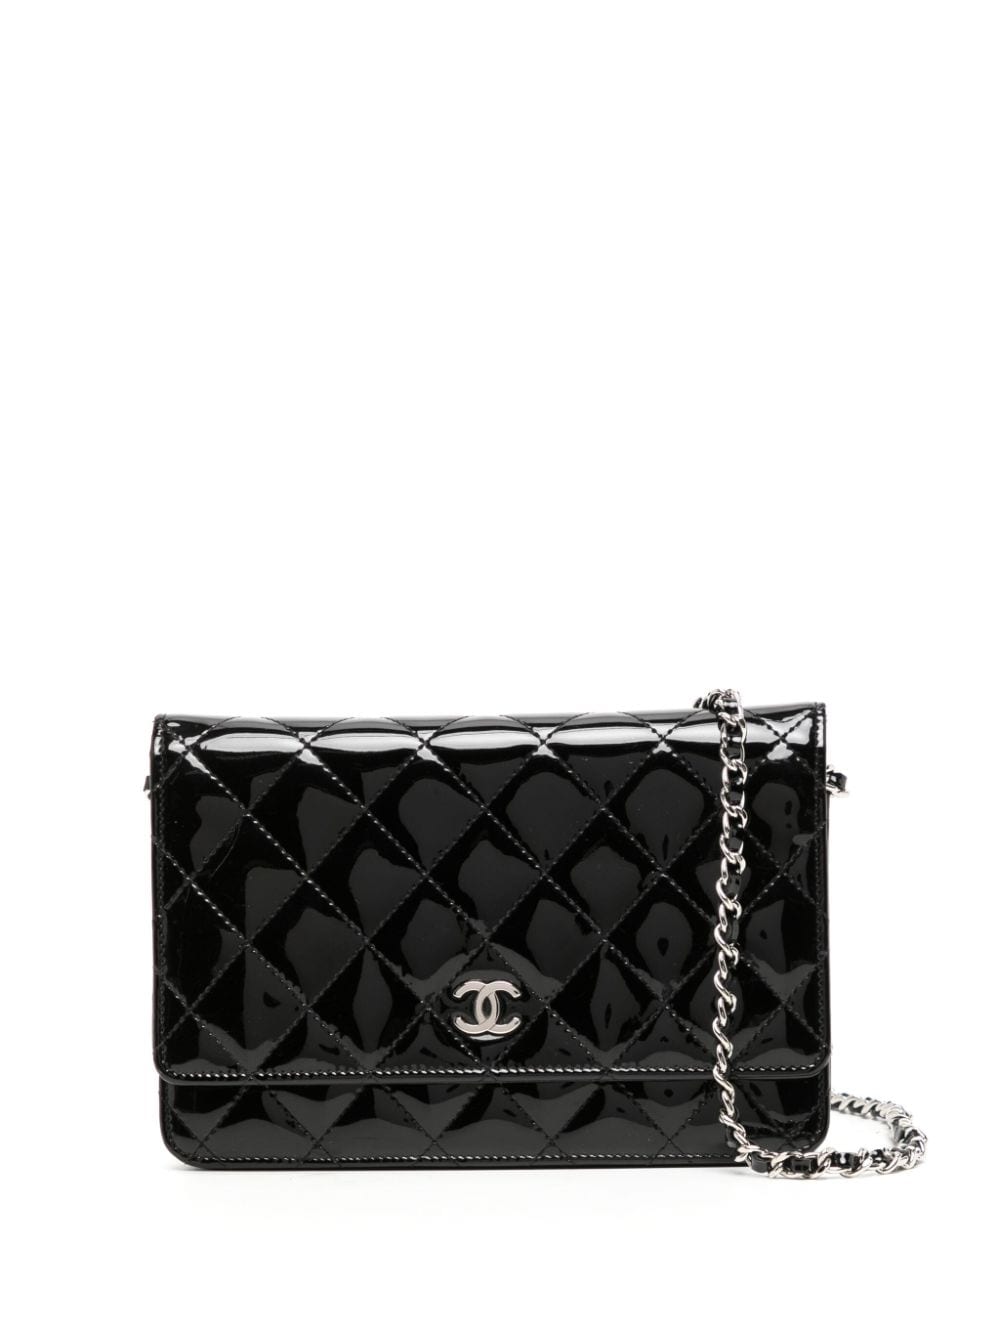 CHANEL Pre-Owned 1995-1997 Large Diamond Quilted Flap Crossbody